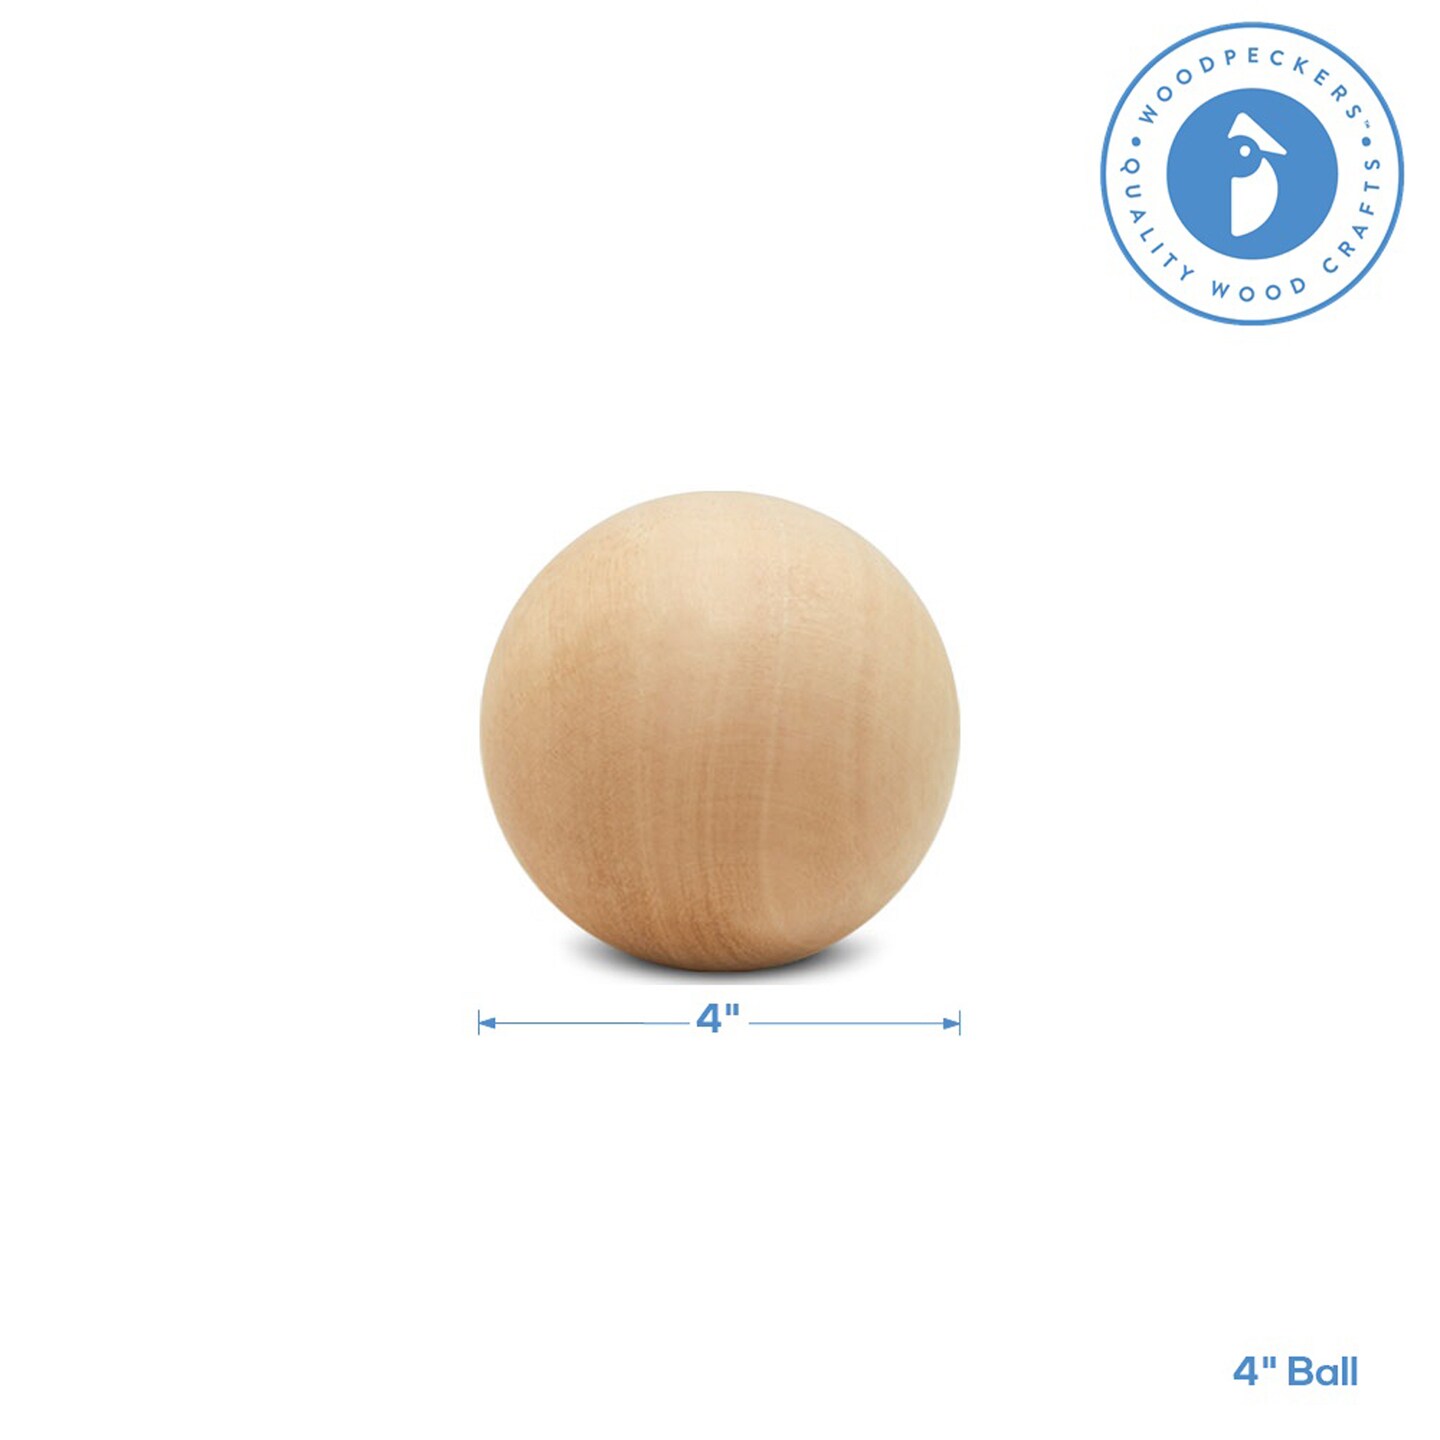 Round Wooden Ball, Bag of Wood Round Ball, Small Wooden Balls, for